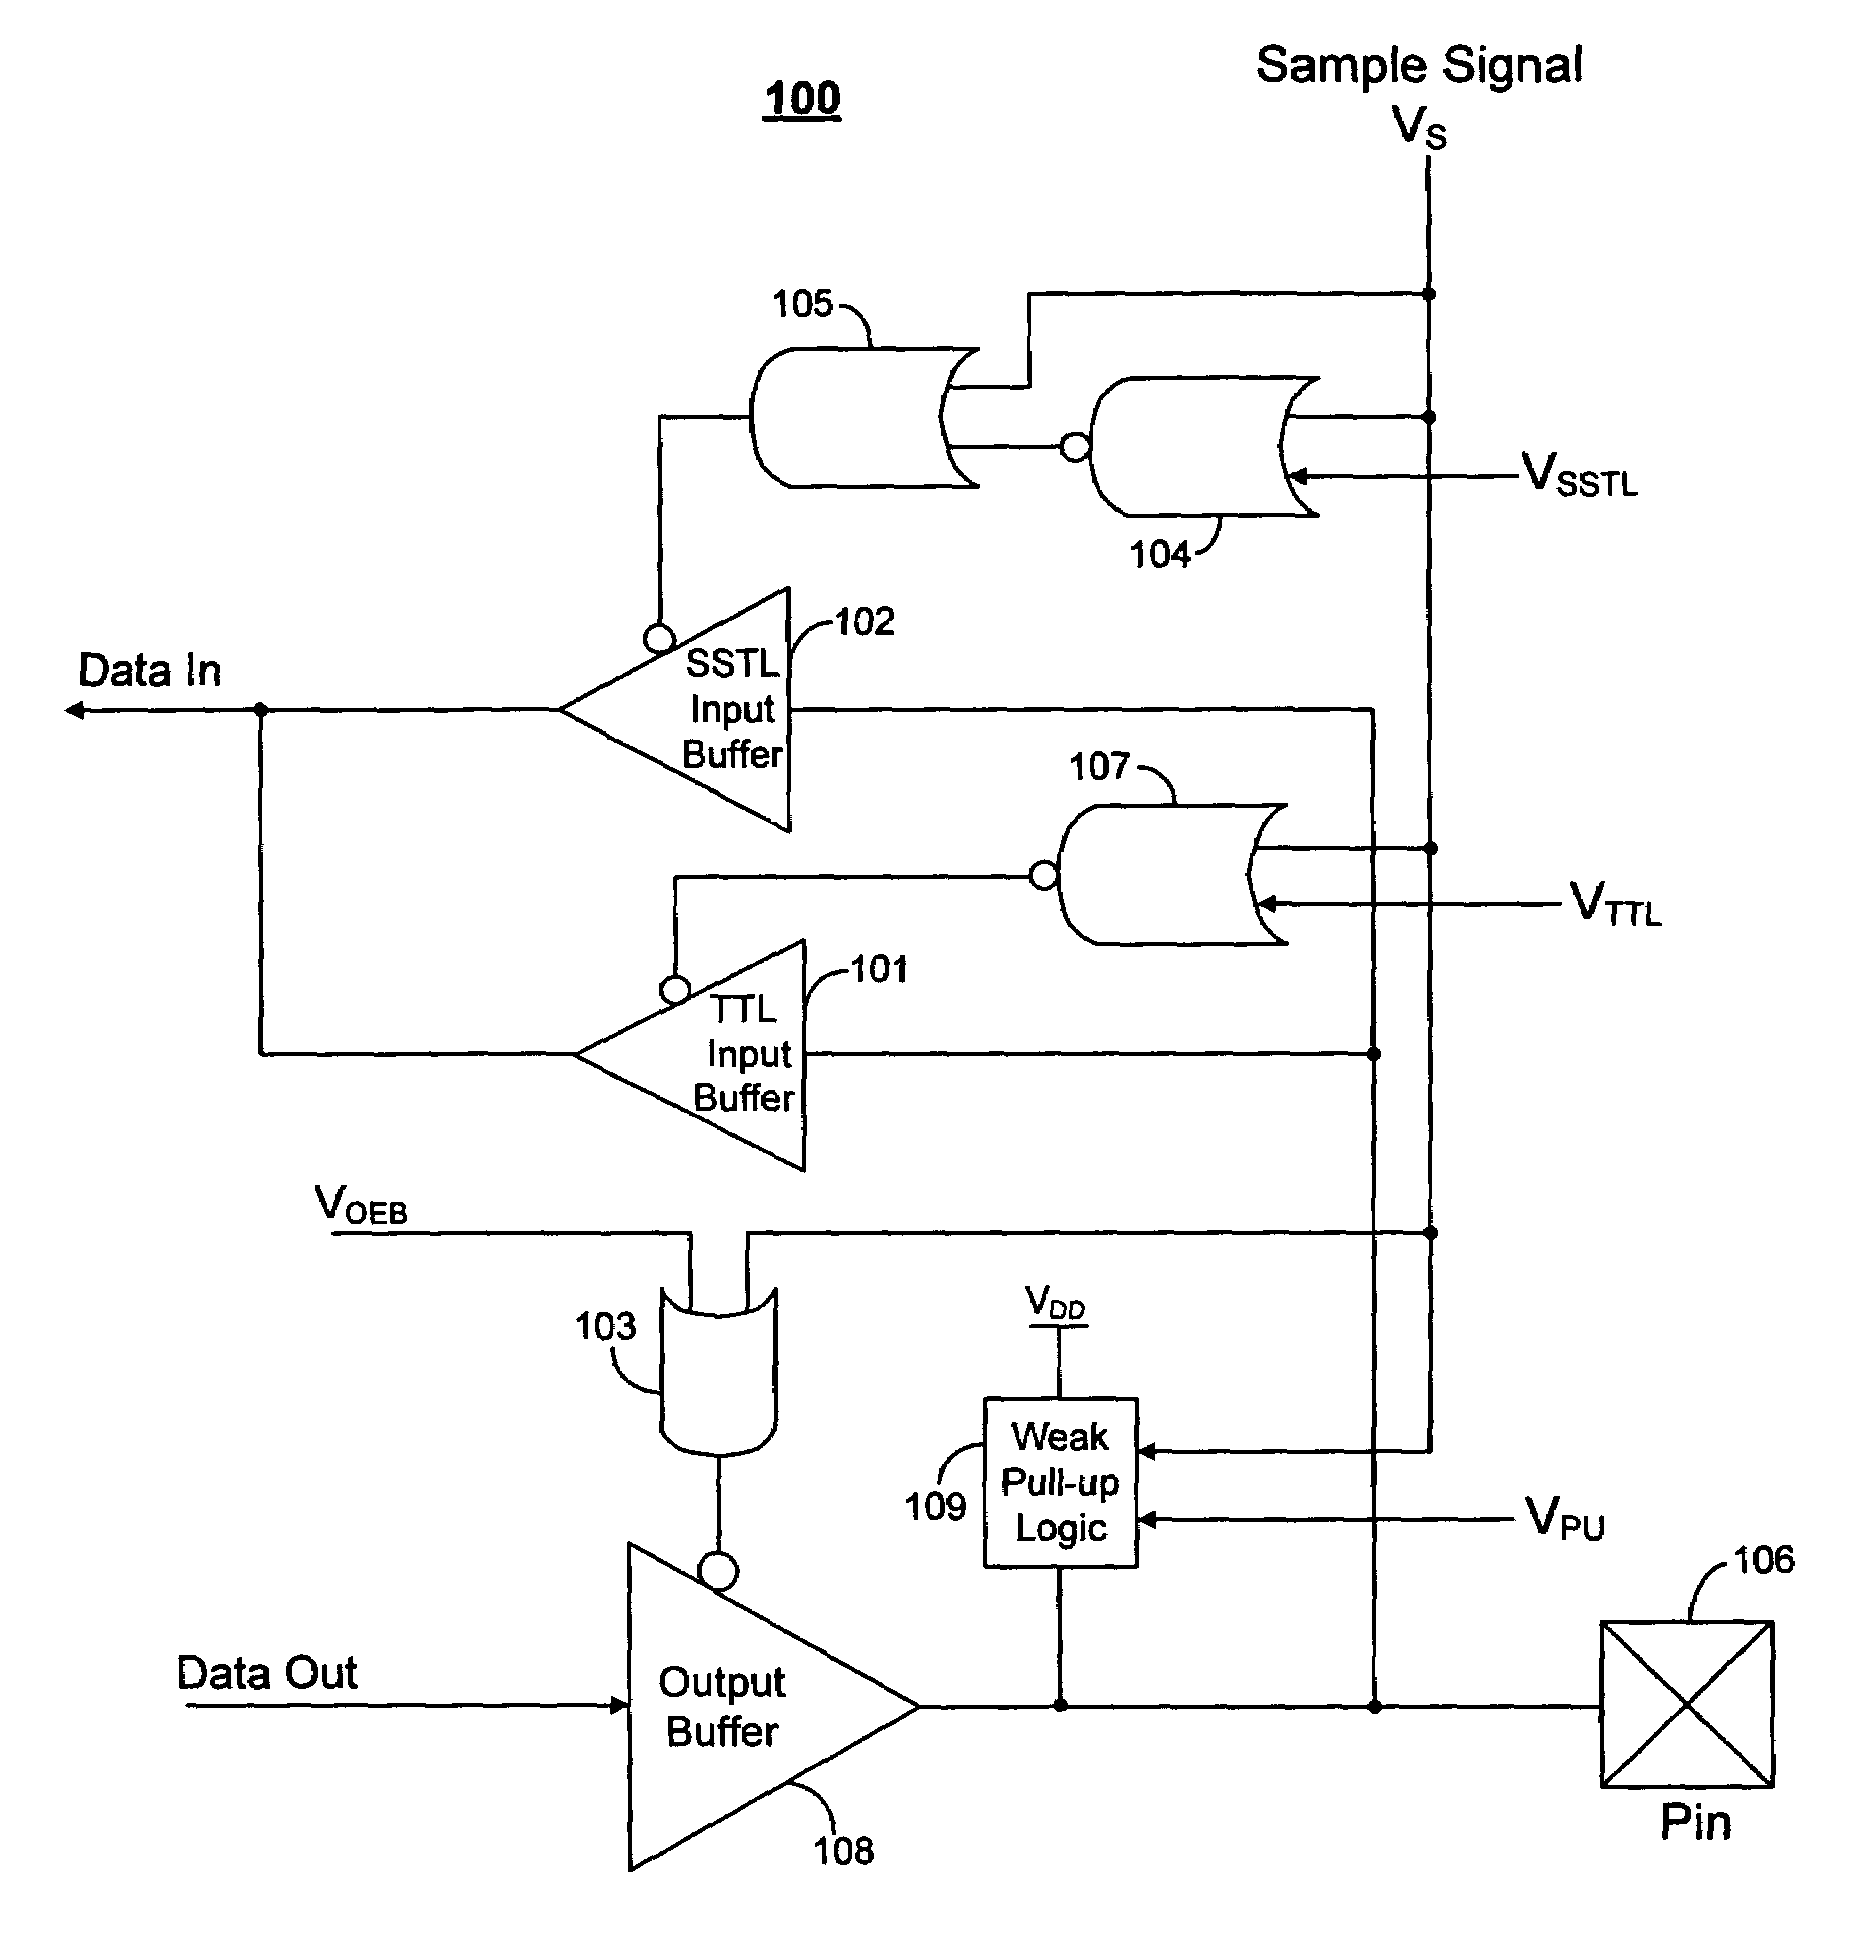 Techniques for capturing signals at output pins in a programmable logic integrated circuit